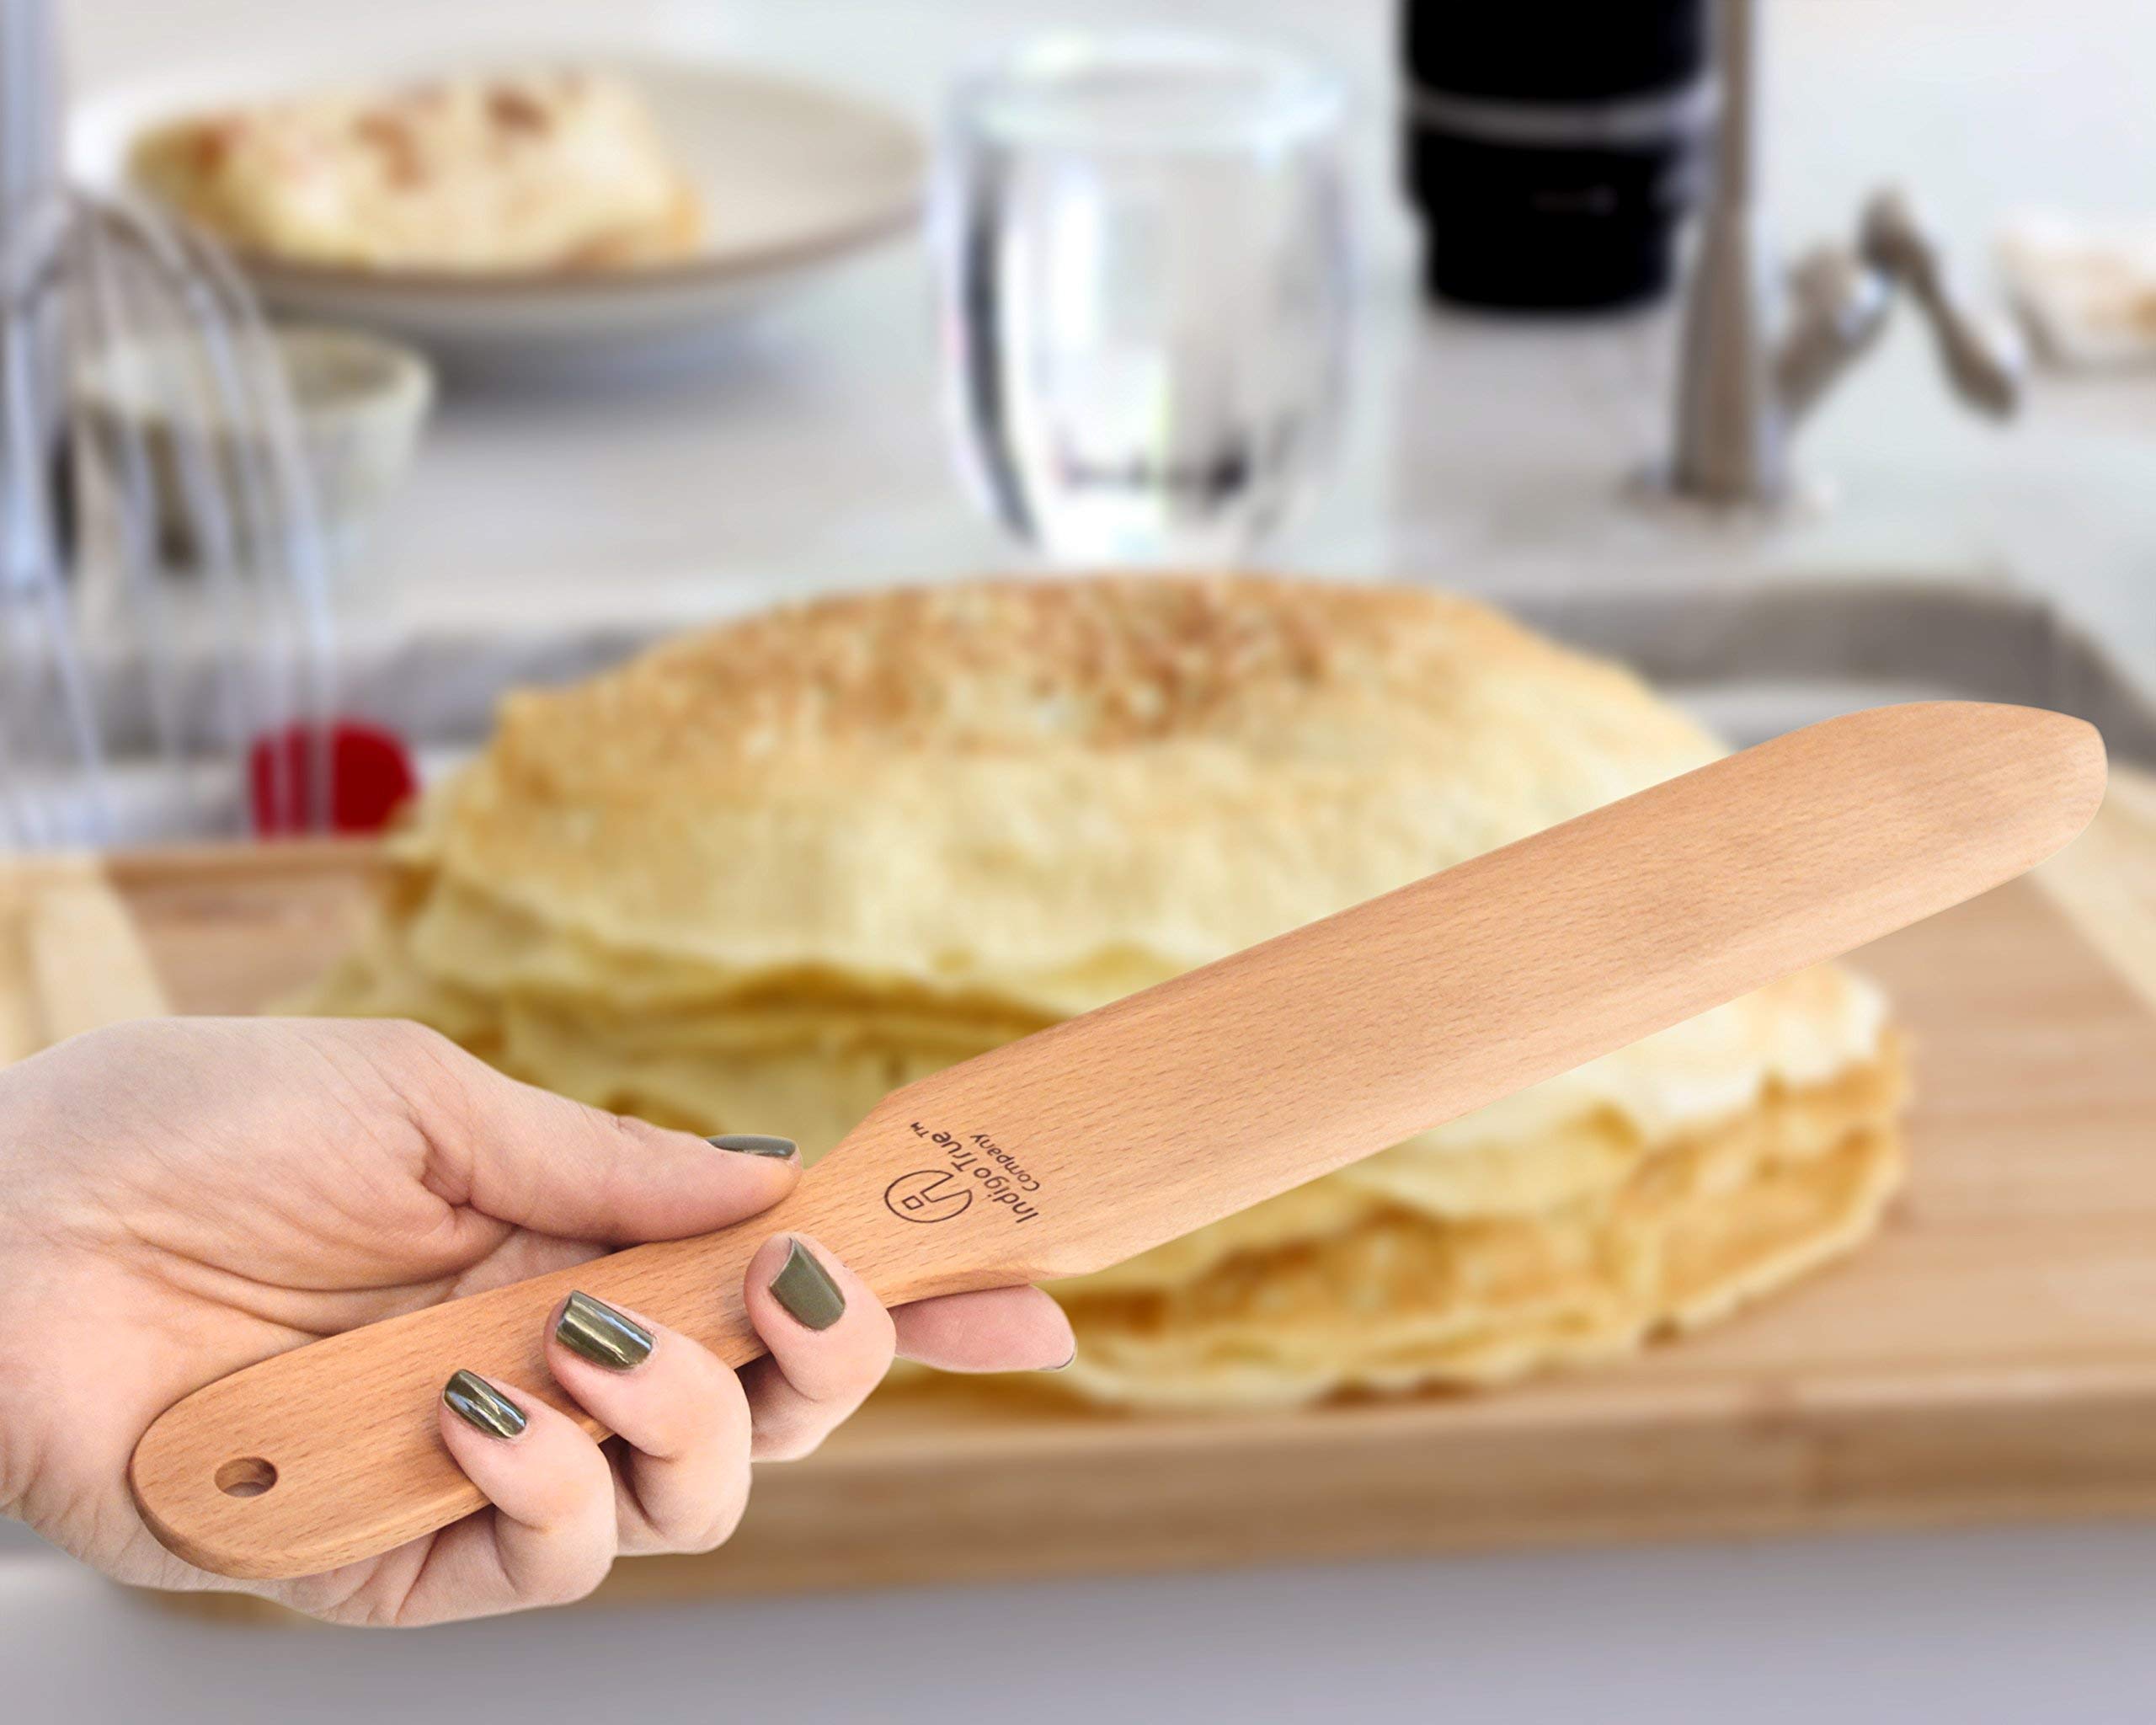 The ORIGINAL Crepe Spreader and Spatula Kit - 2 Piece Set (5” Spreader and 14” Spatula) Convenient Size to Fit Medium Crepe Pan Maker | All Natural Beechwood Construction only From Indigo True Company